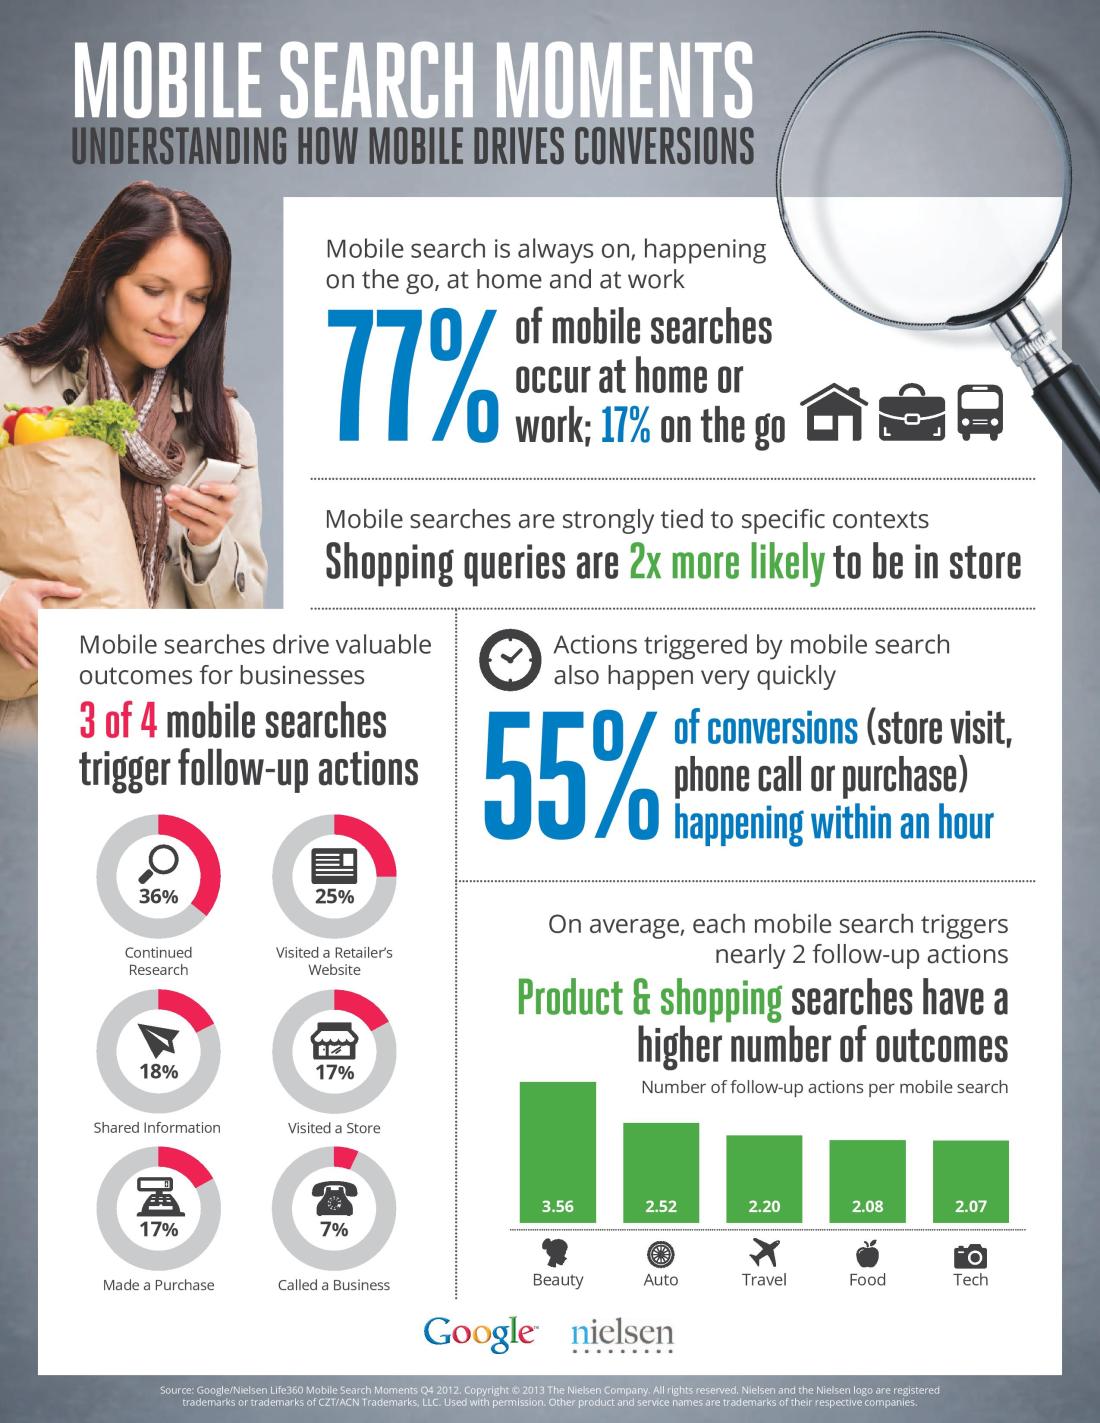 Understanding How Mobile Drives Conversions - A Study By Google & Nielsen